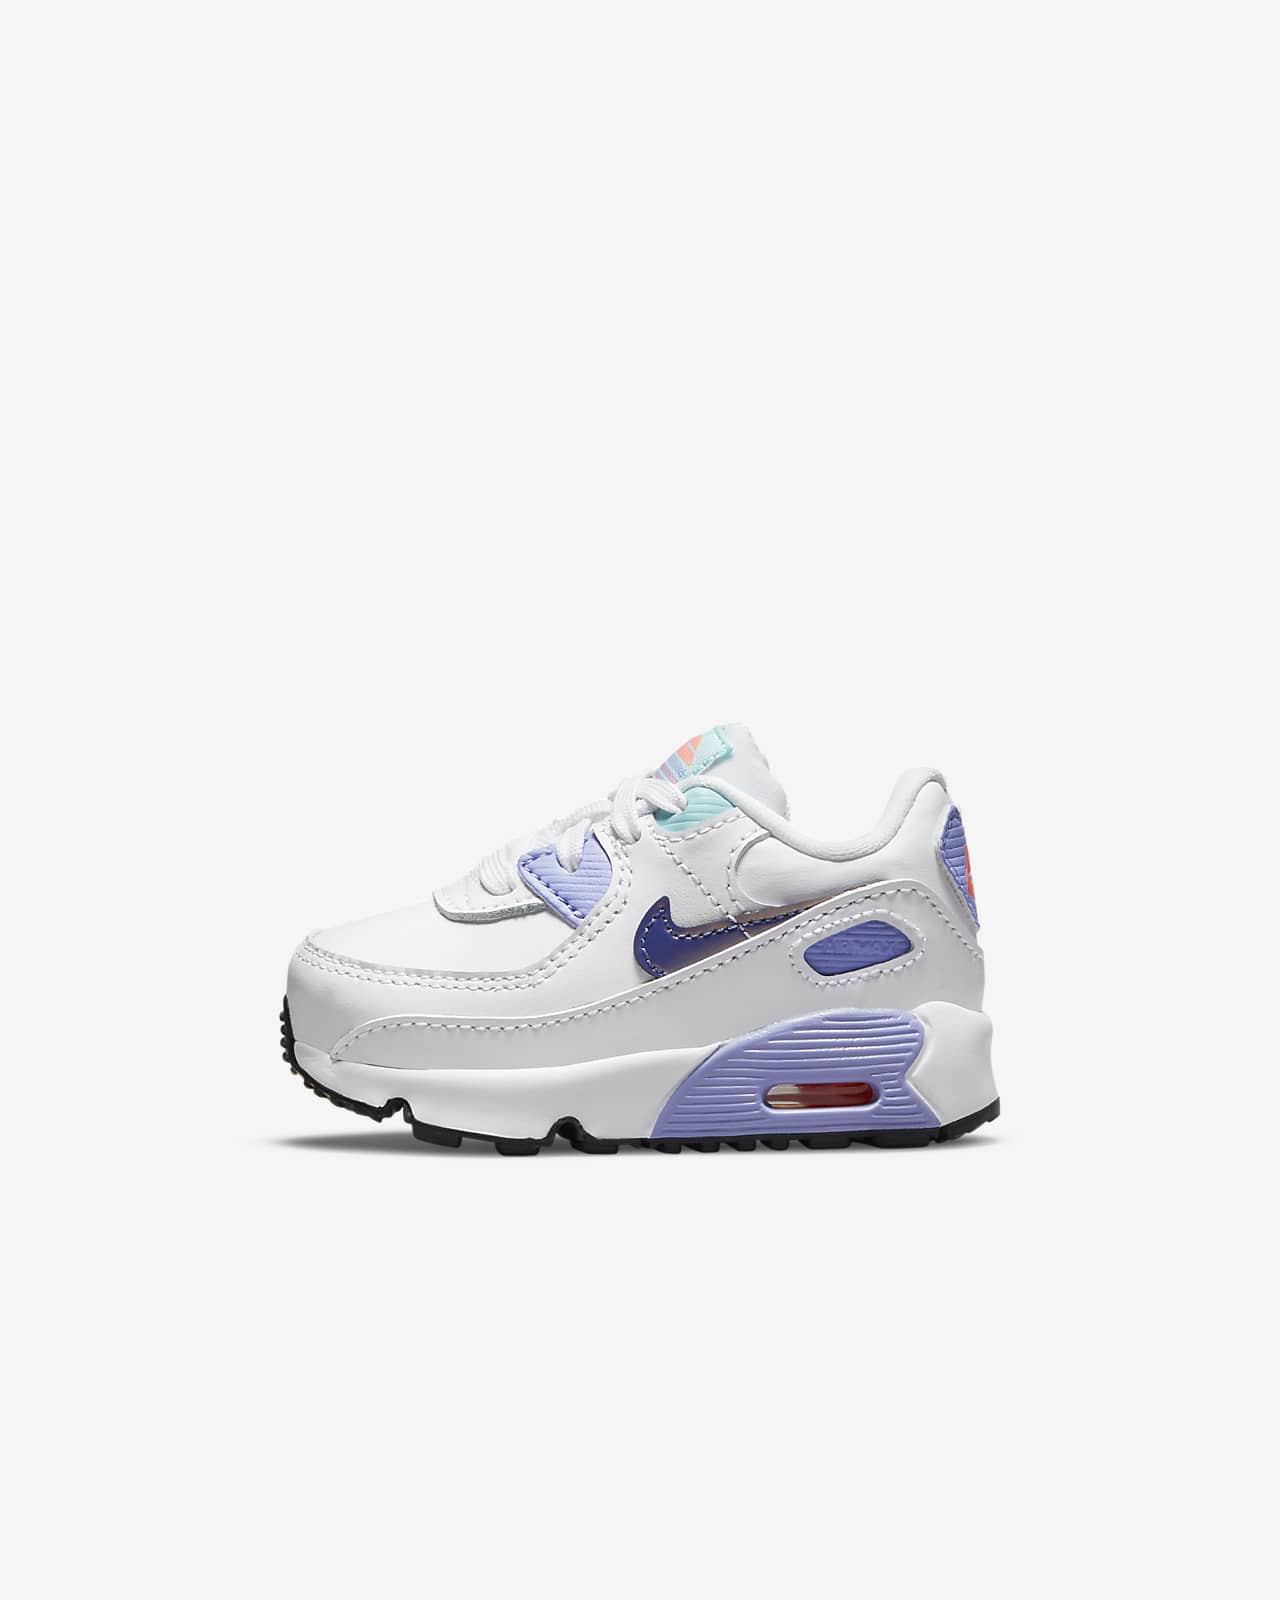 nike air max 90 childrens size 2